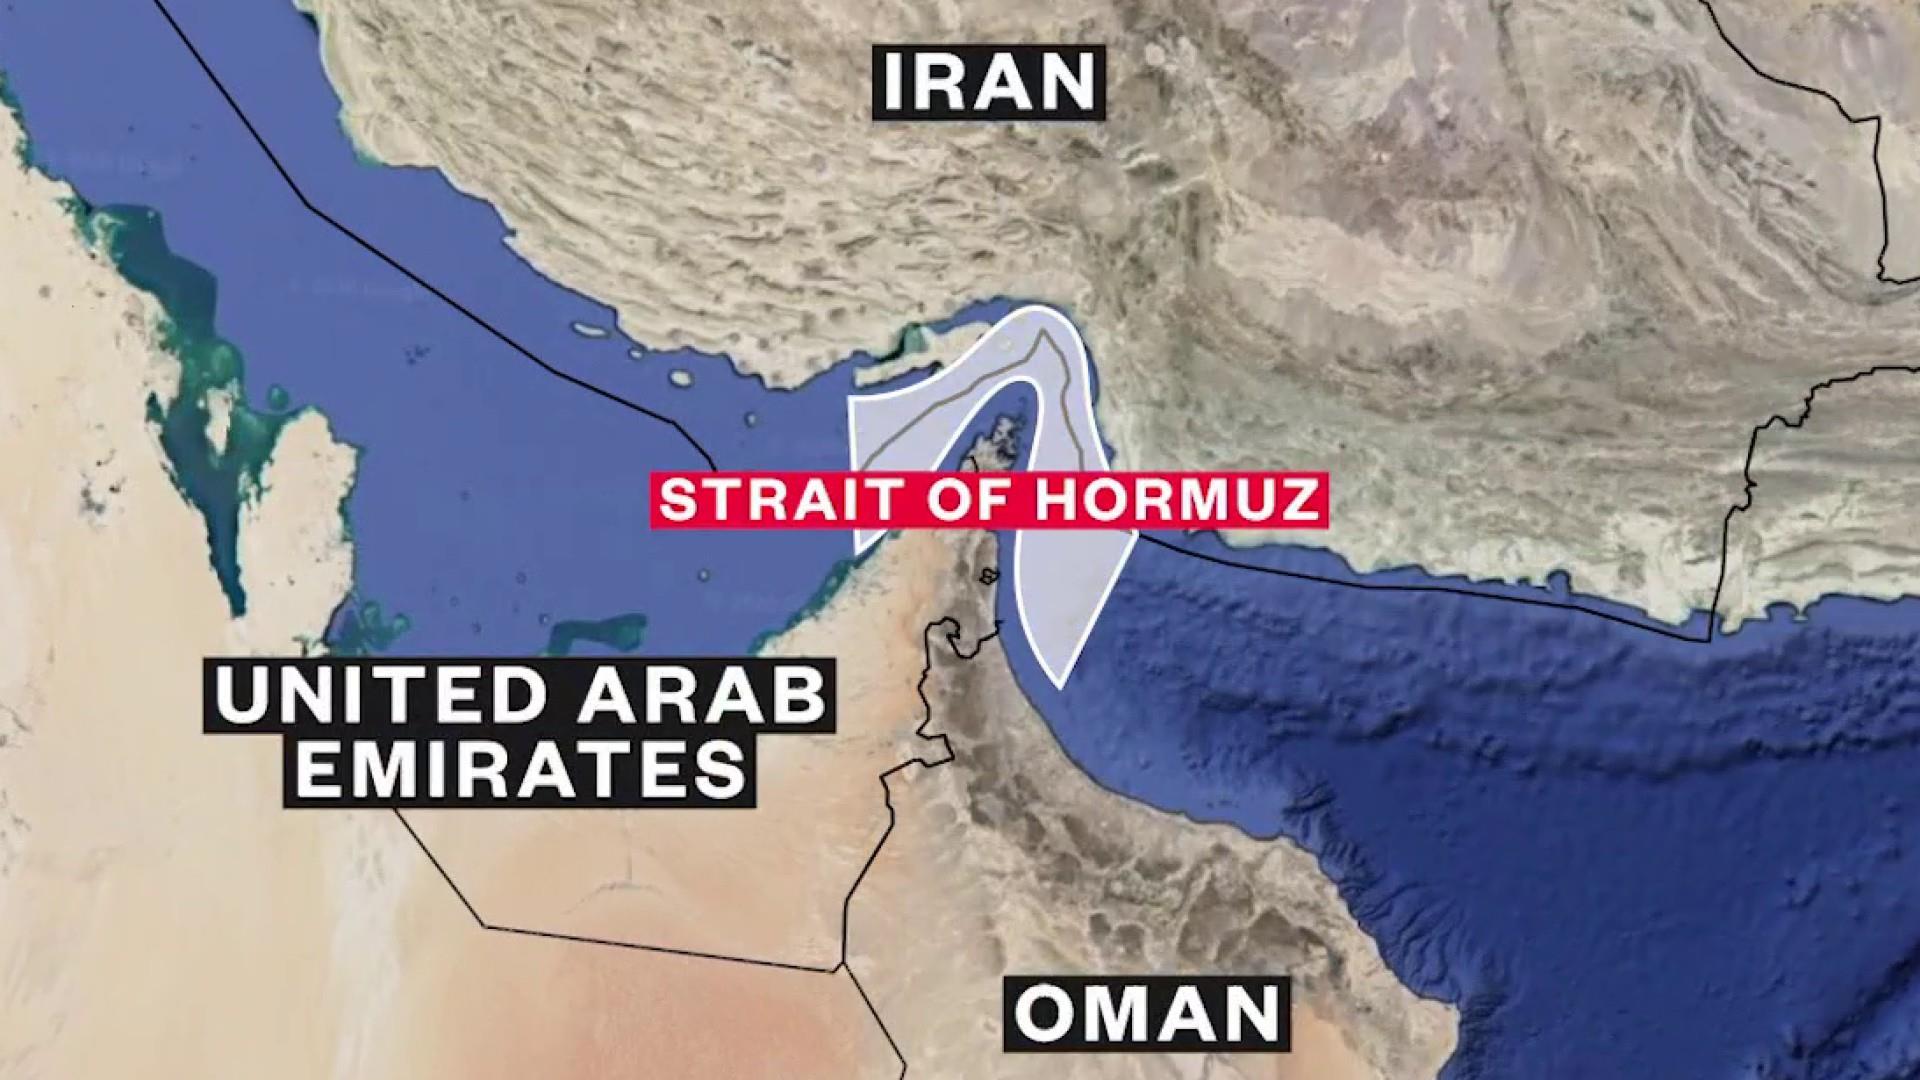 How the Strait of Hormuz could potentially lead to war with Iran